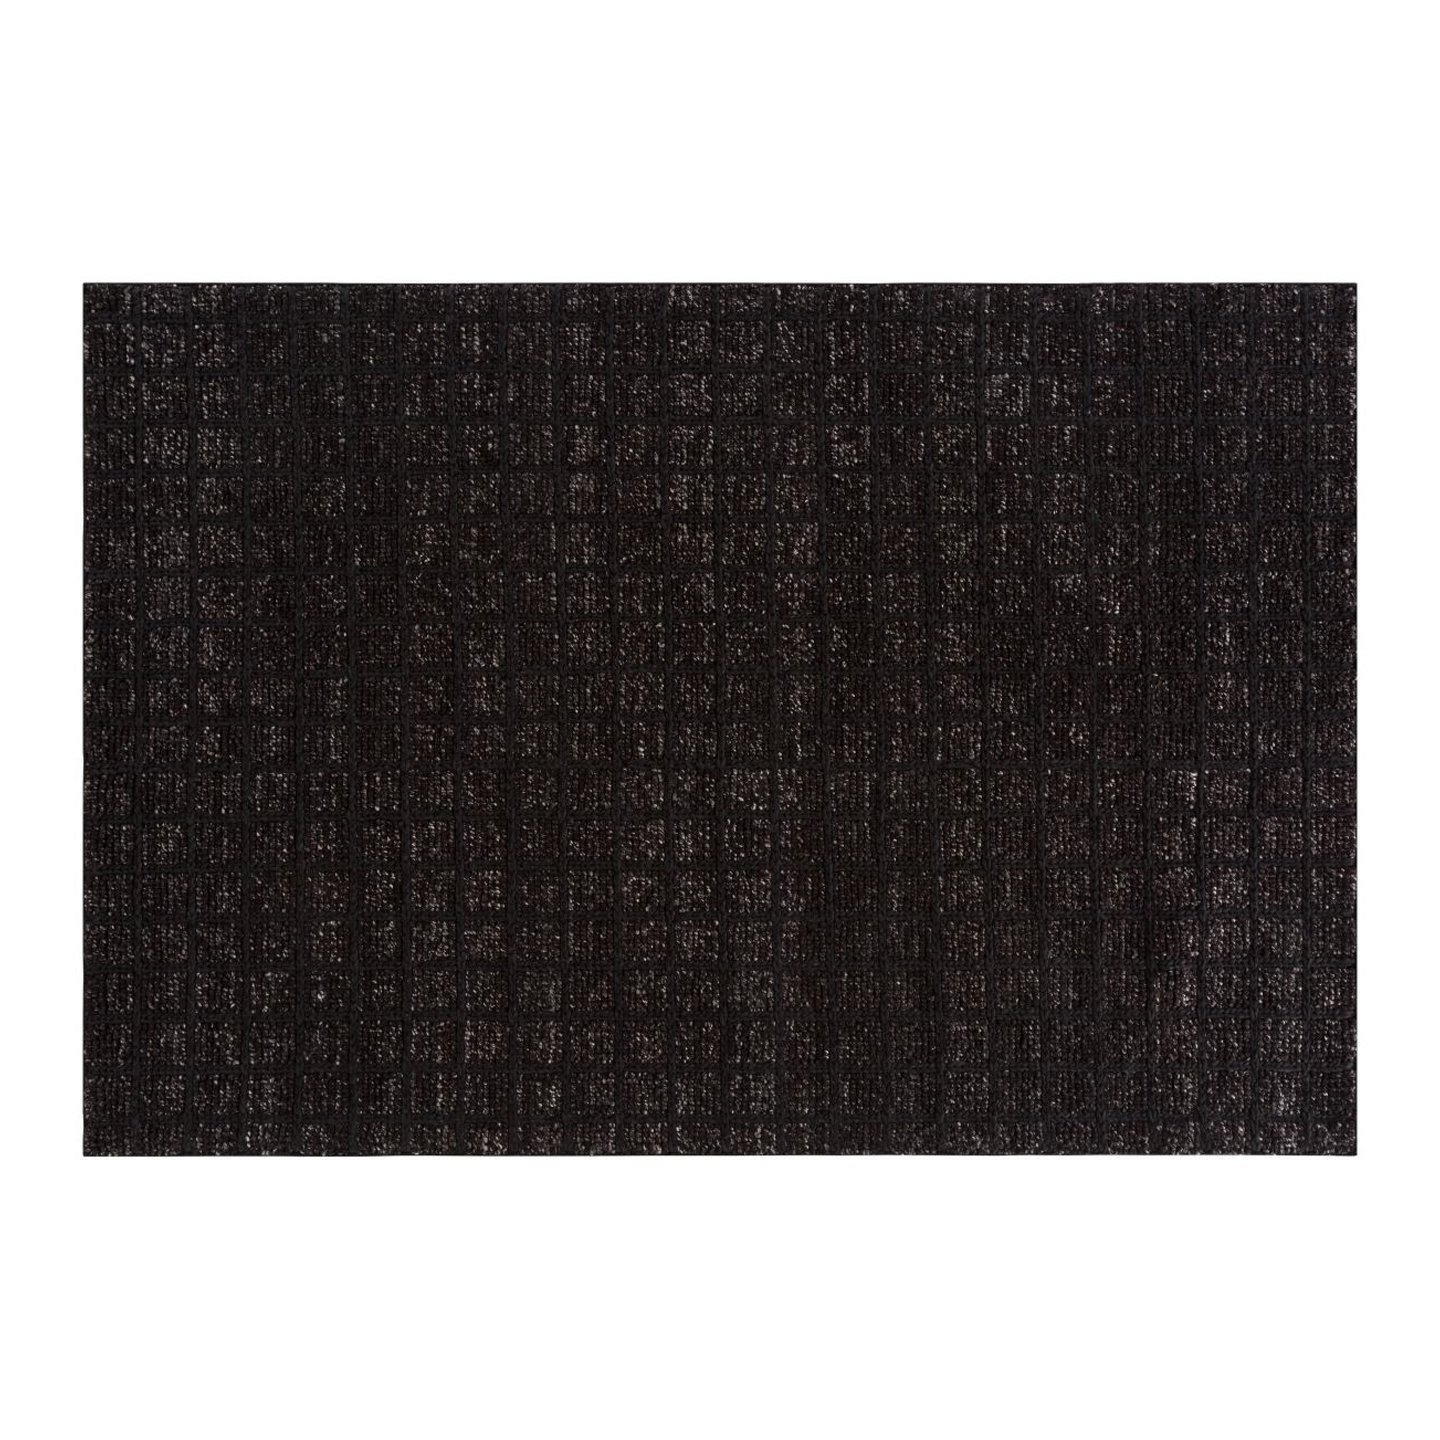 Haworth Mangas Natural Rug in black color and square pattern